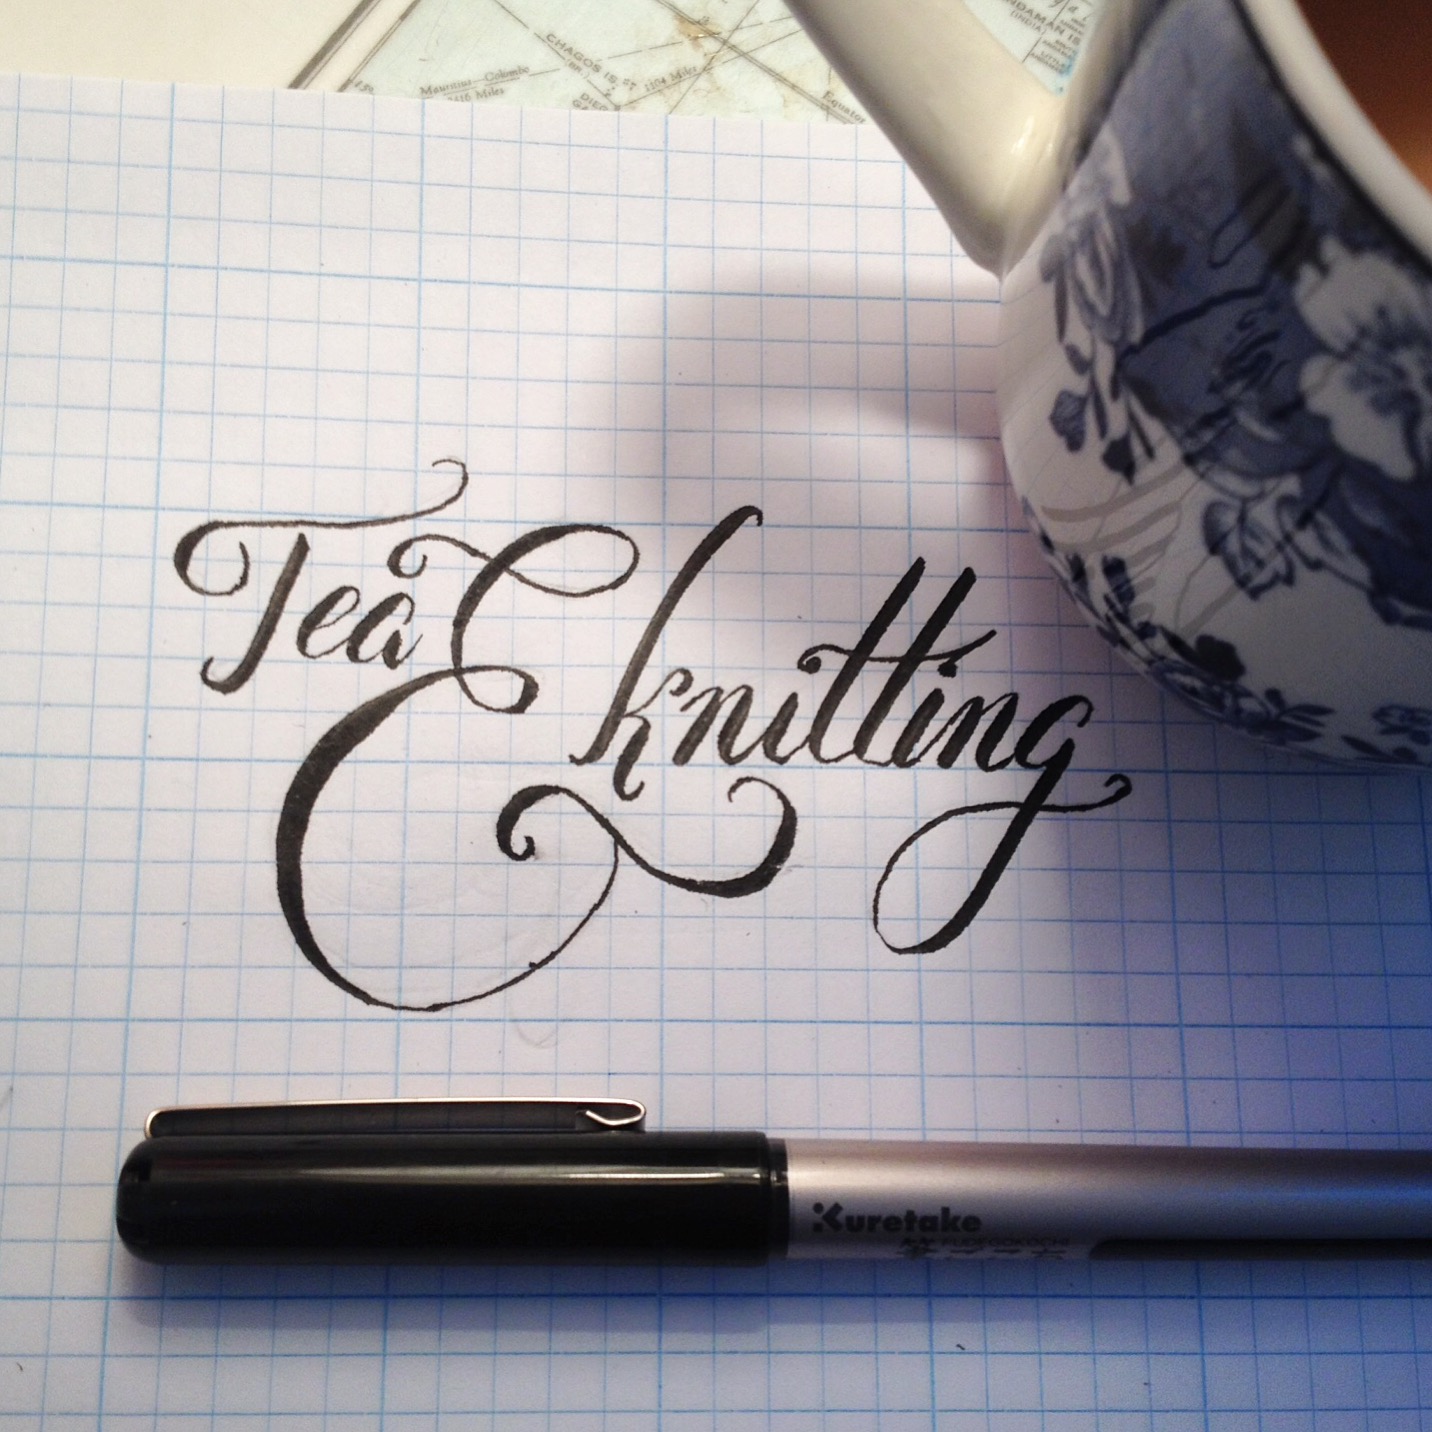 hand lettering tea and knitting practice on graph paper kuretake